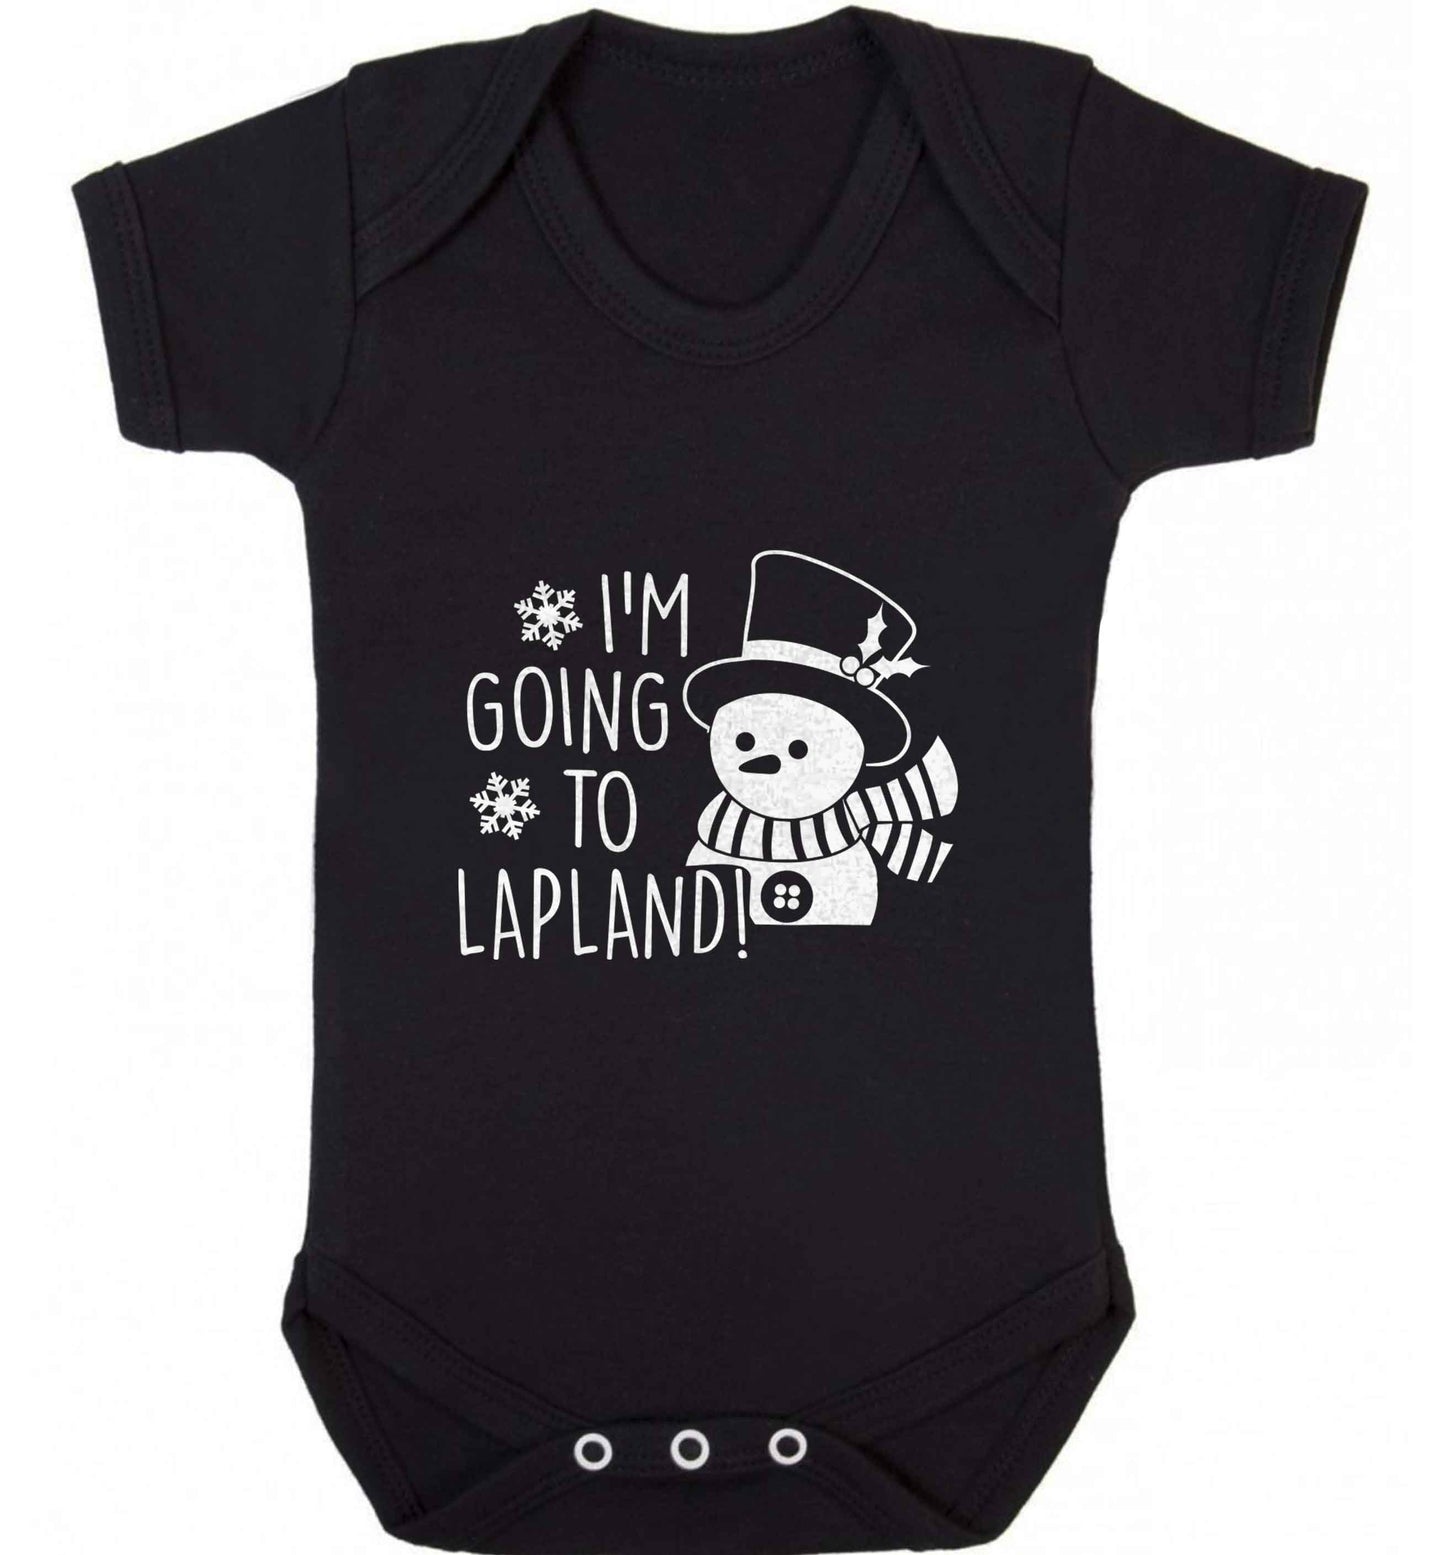 I'm going to Lapland baby vest black 18-24 months